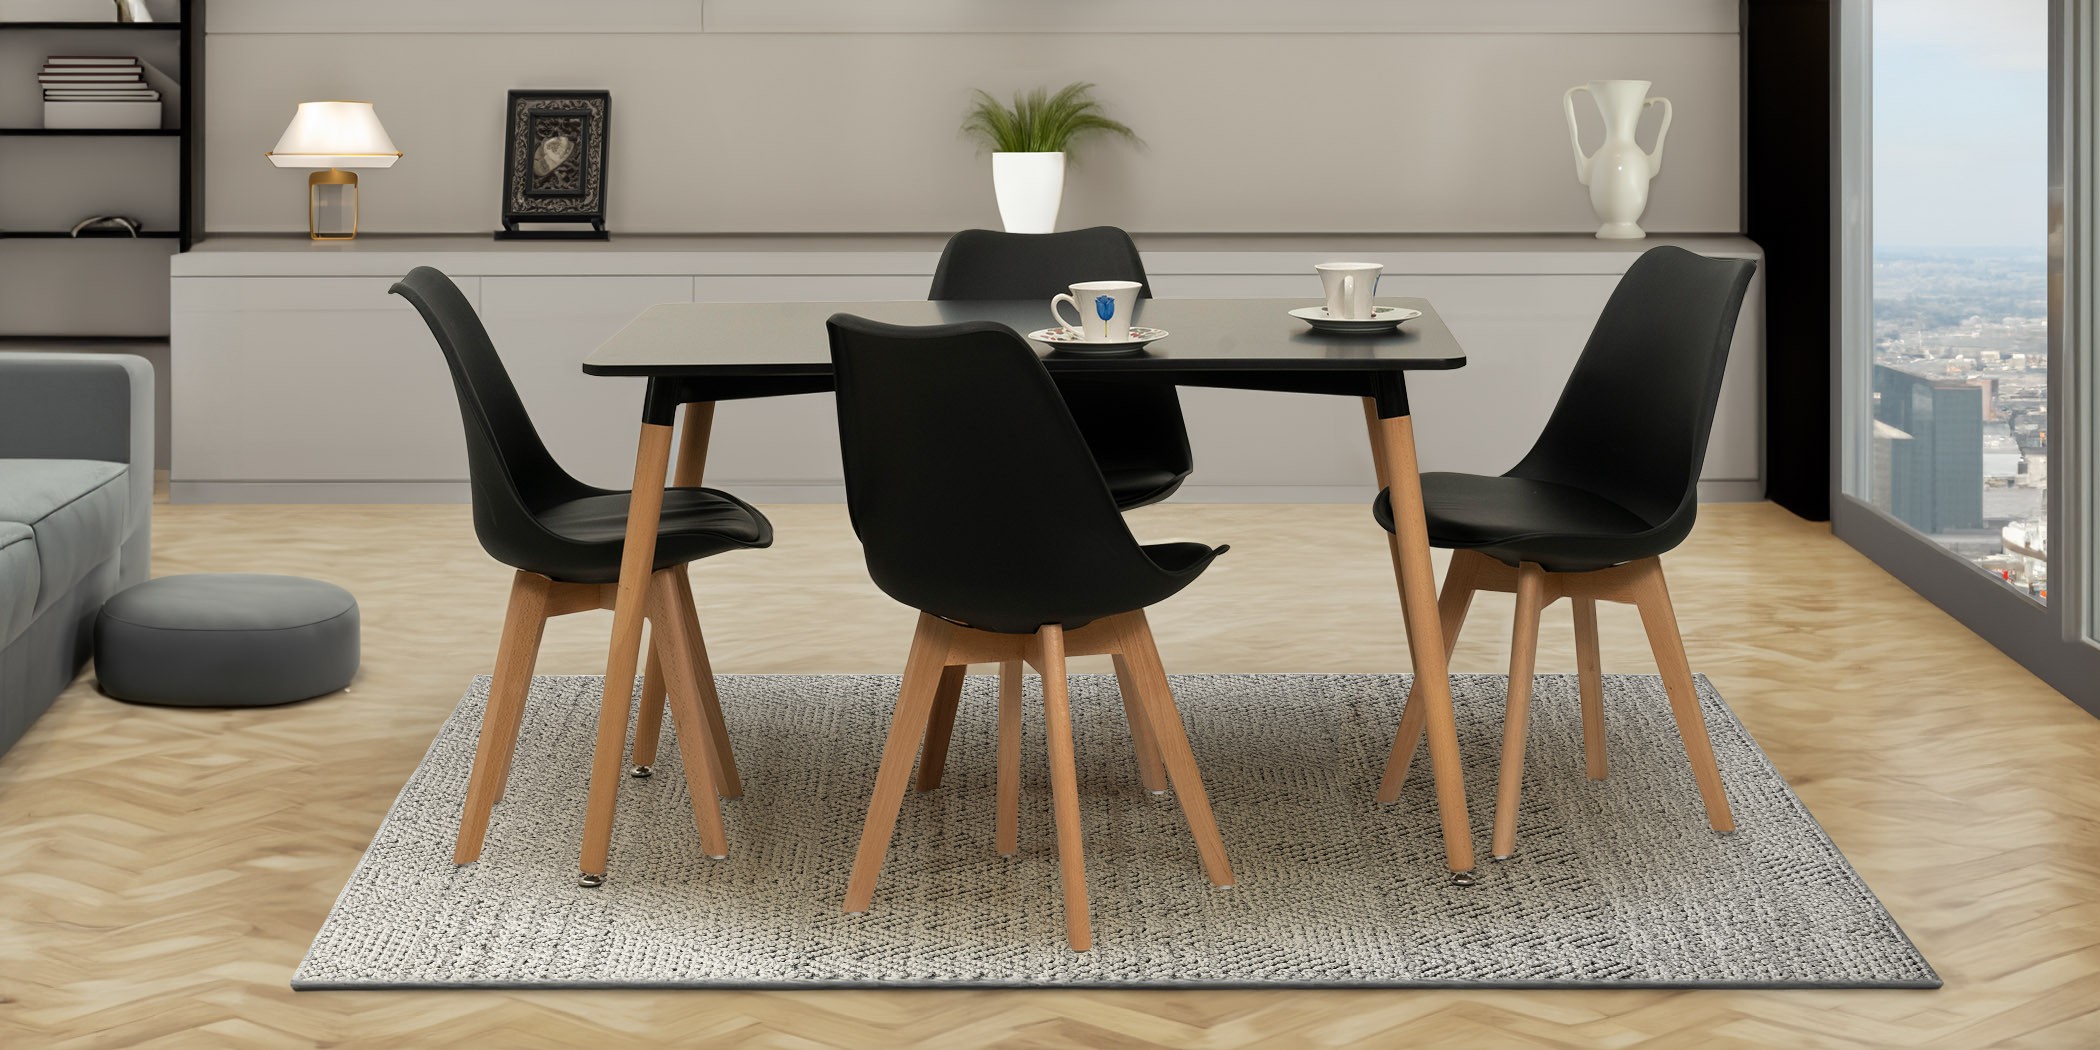 Adrian Table & 4 Chairs Black